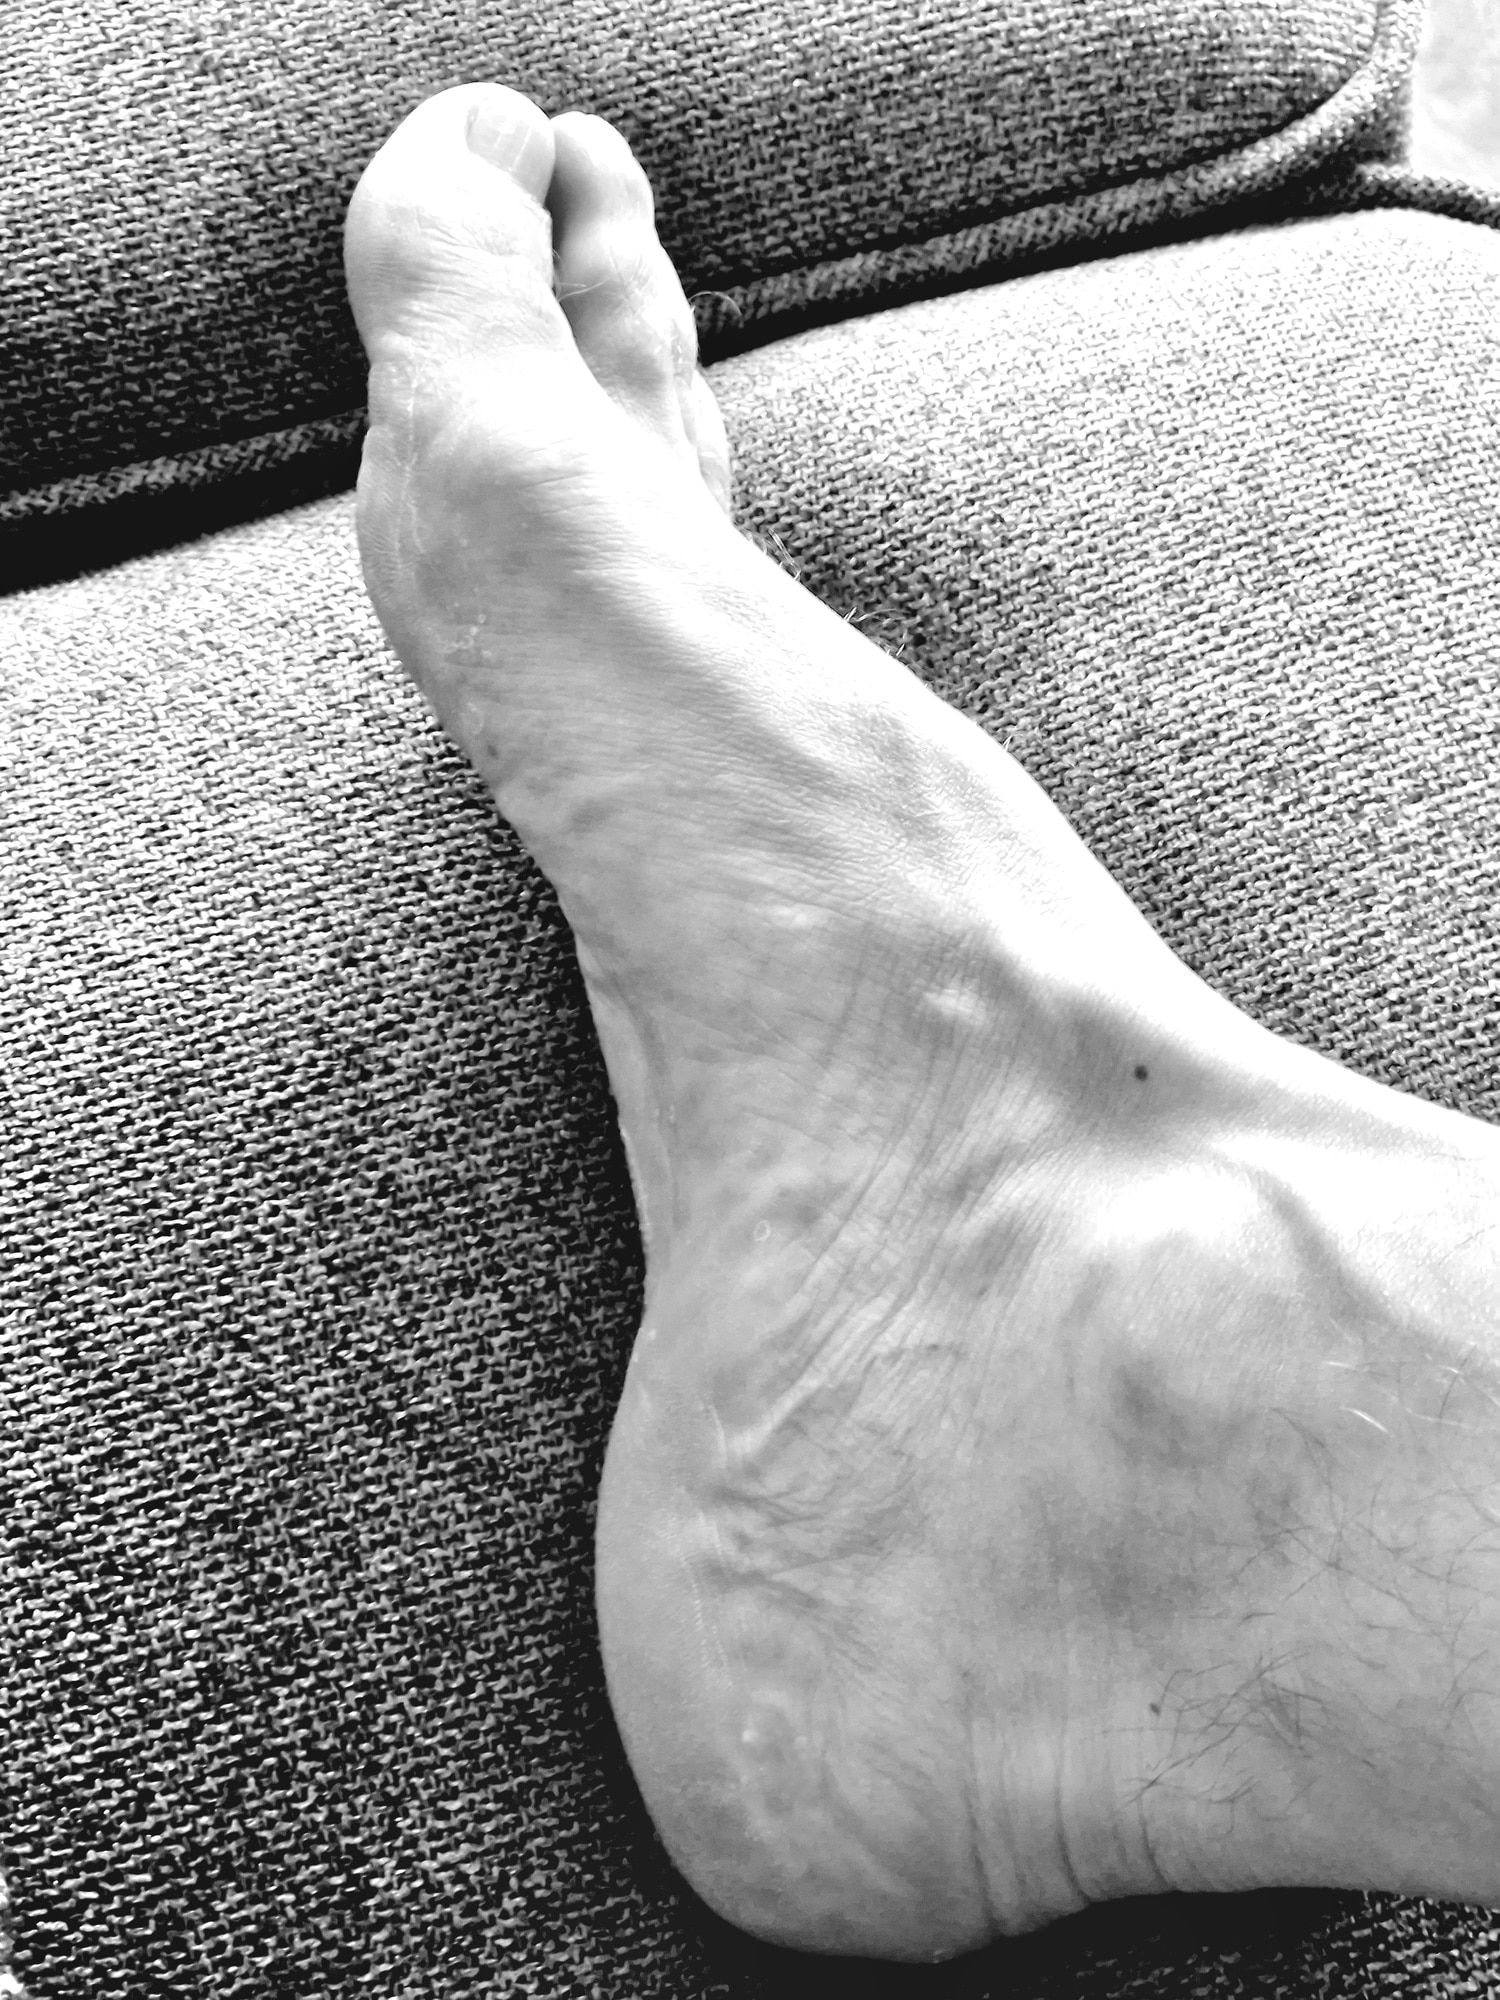 For foot the foot lover, my first foot post #5